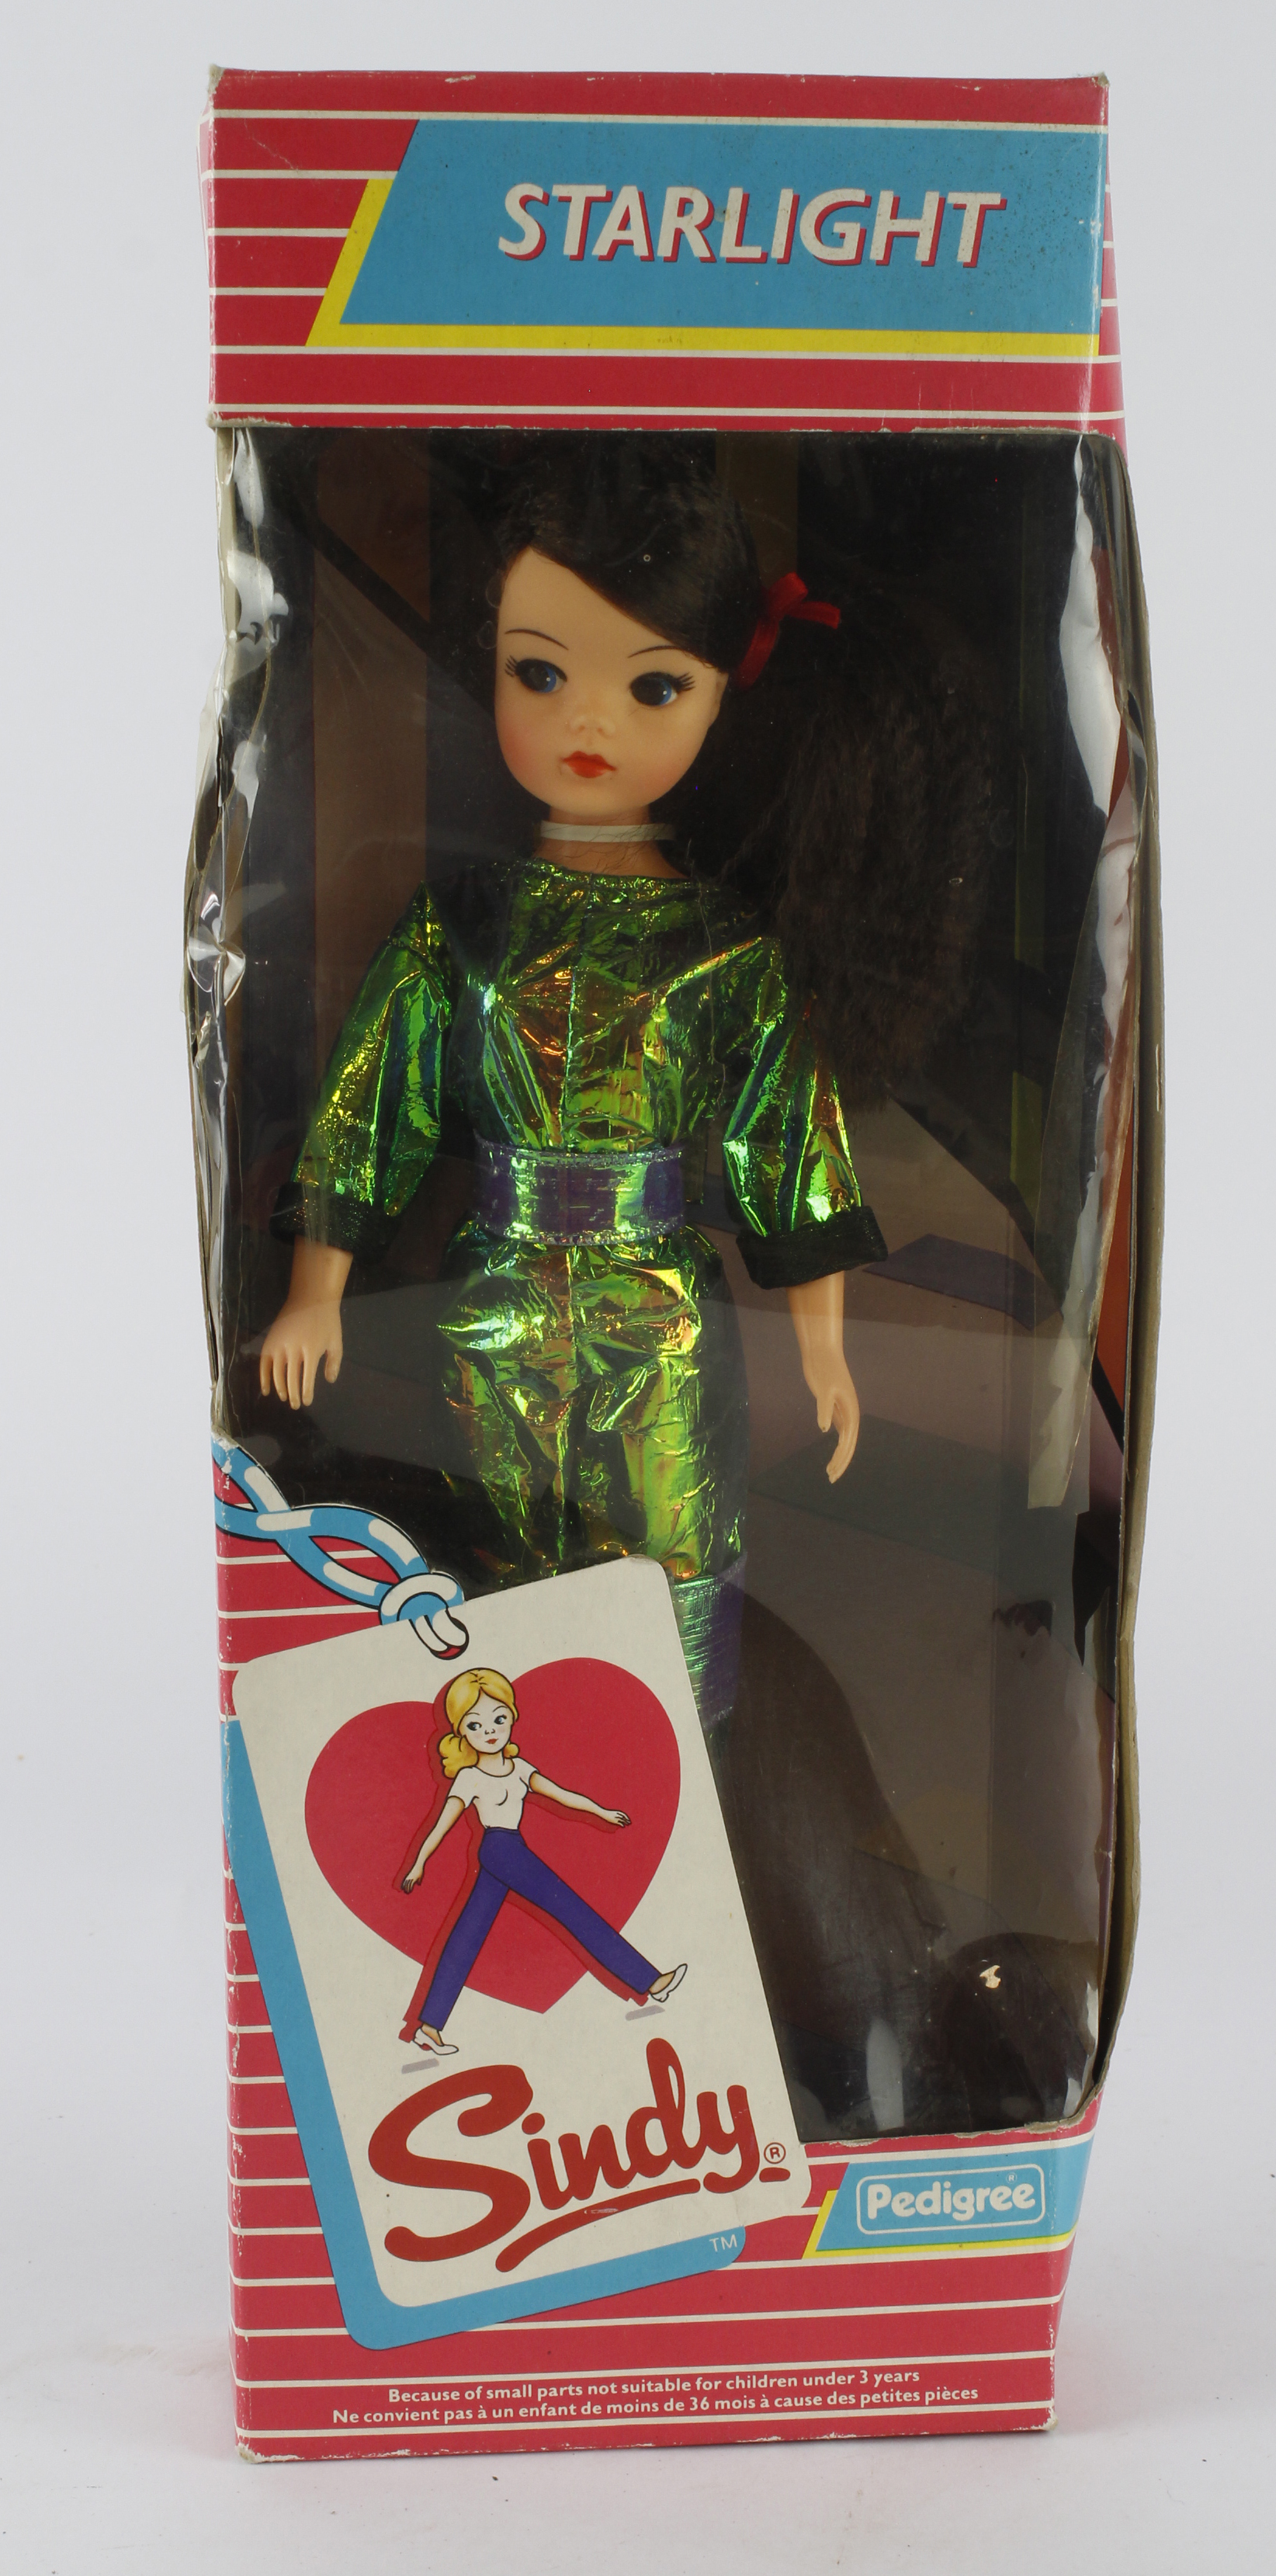 Sindy Starlight doll, by Pedigree (no. 42011), contained in original box